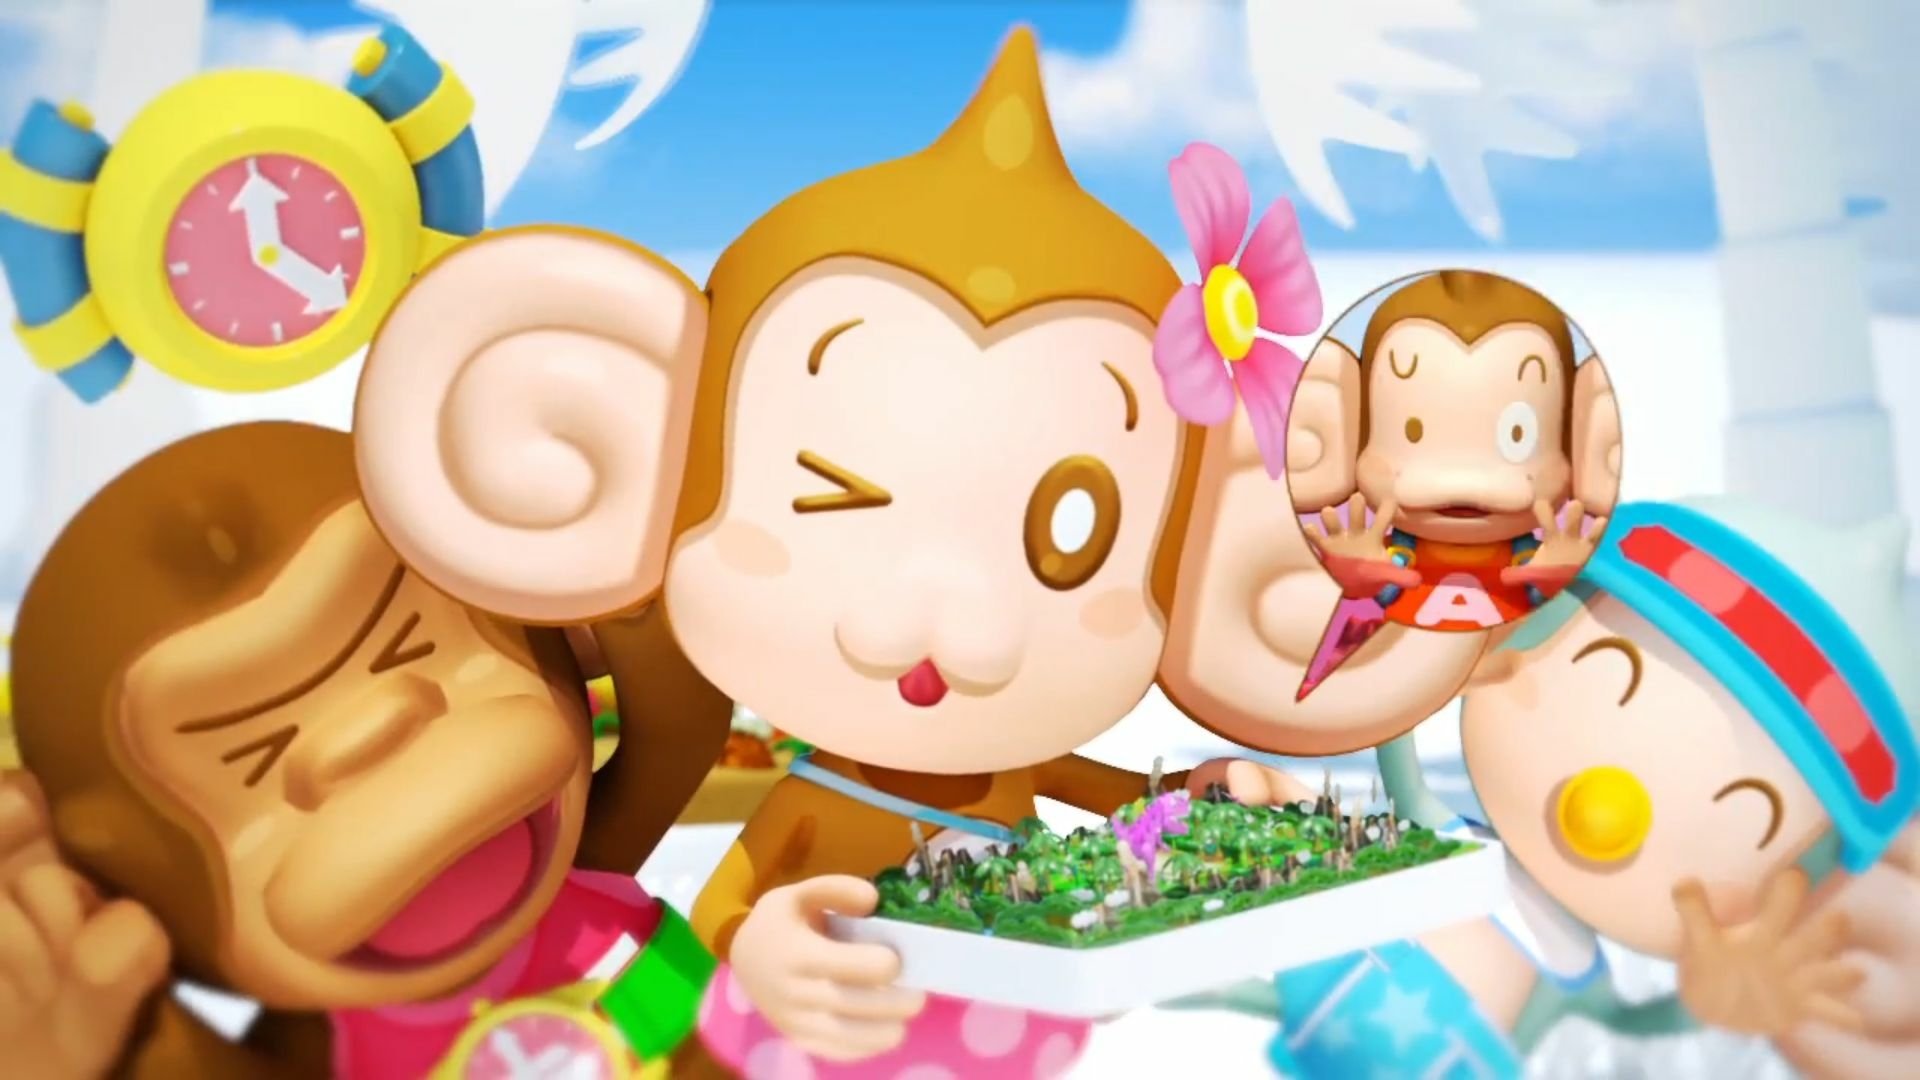 super monkey ball download for pc